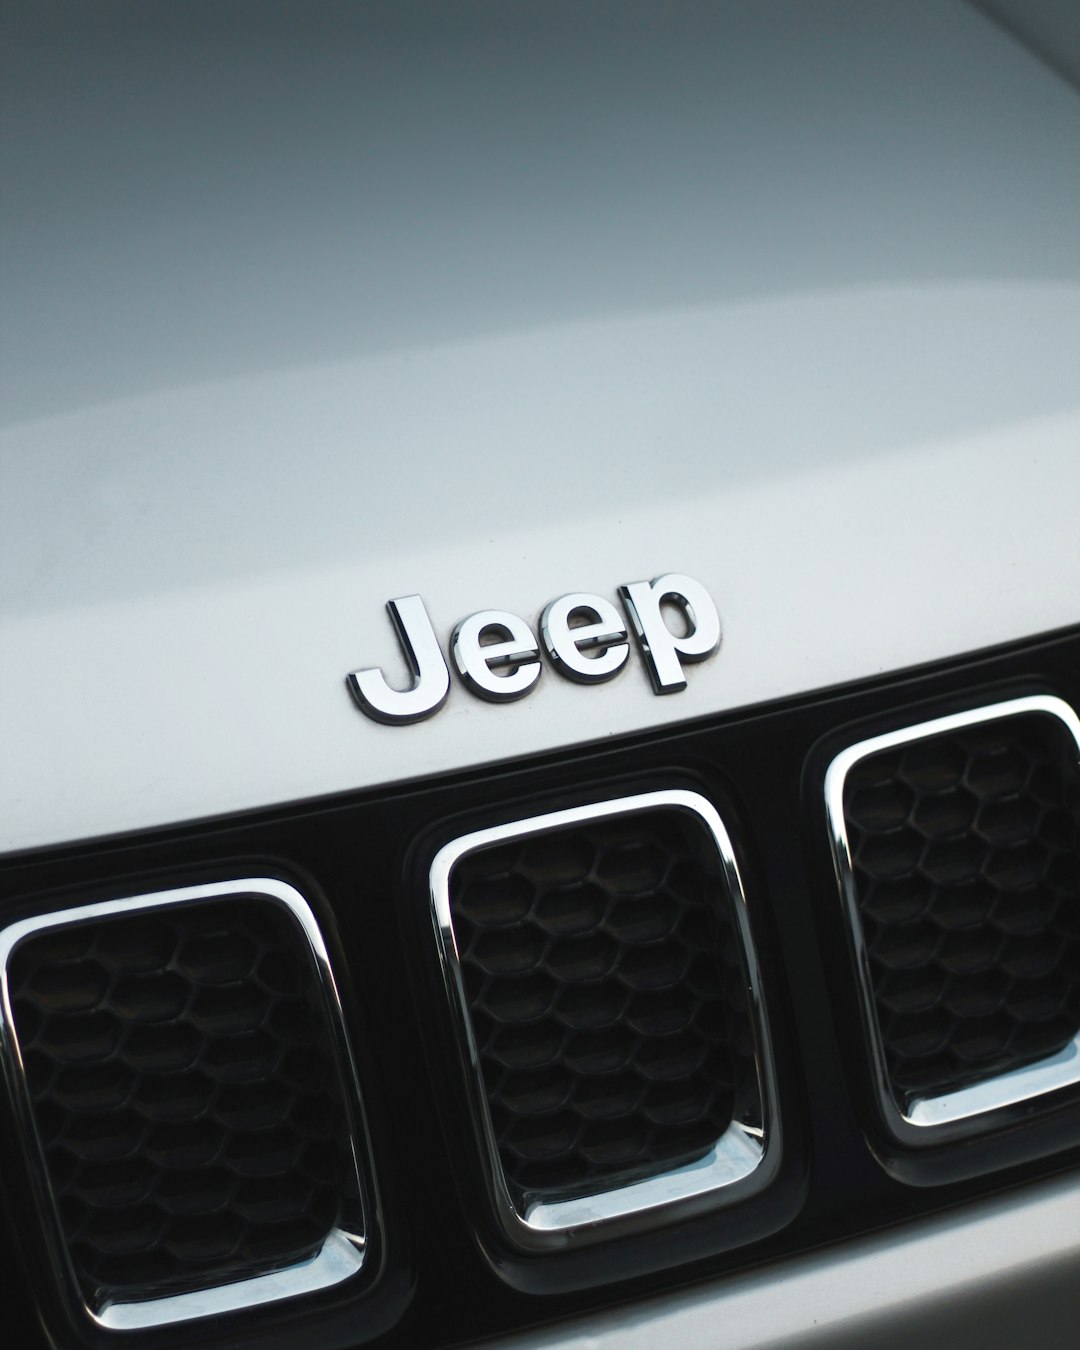 The Jeep Wagoneer is a stylish and versatile SUV with a long-standing reputation for its off-road capabilities and spacious interior.